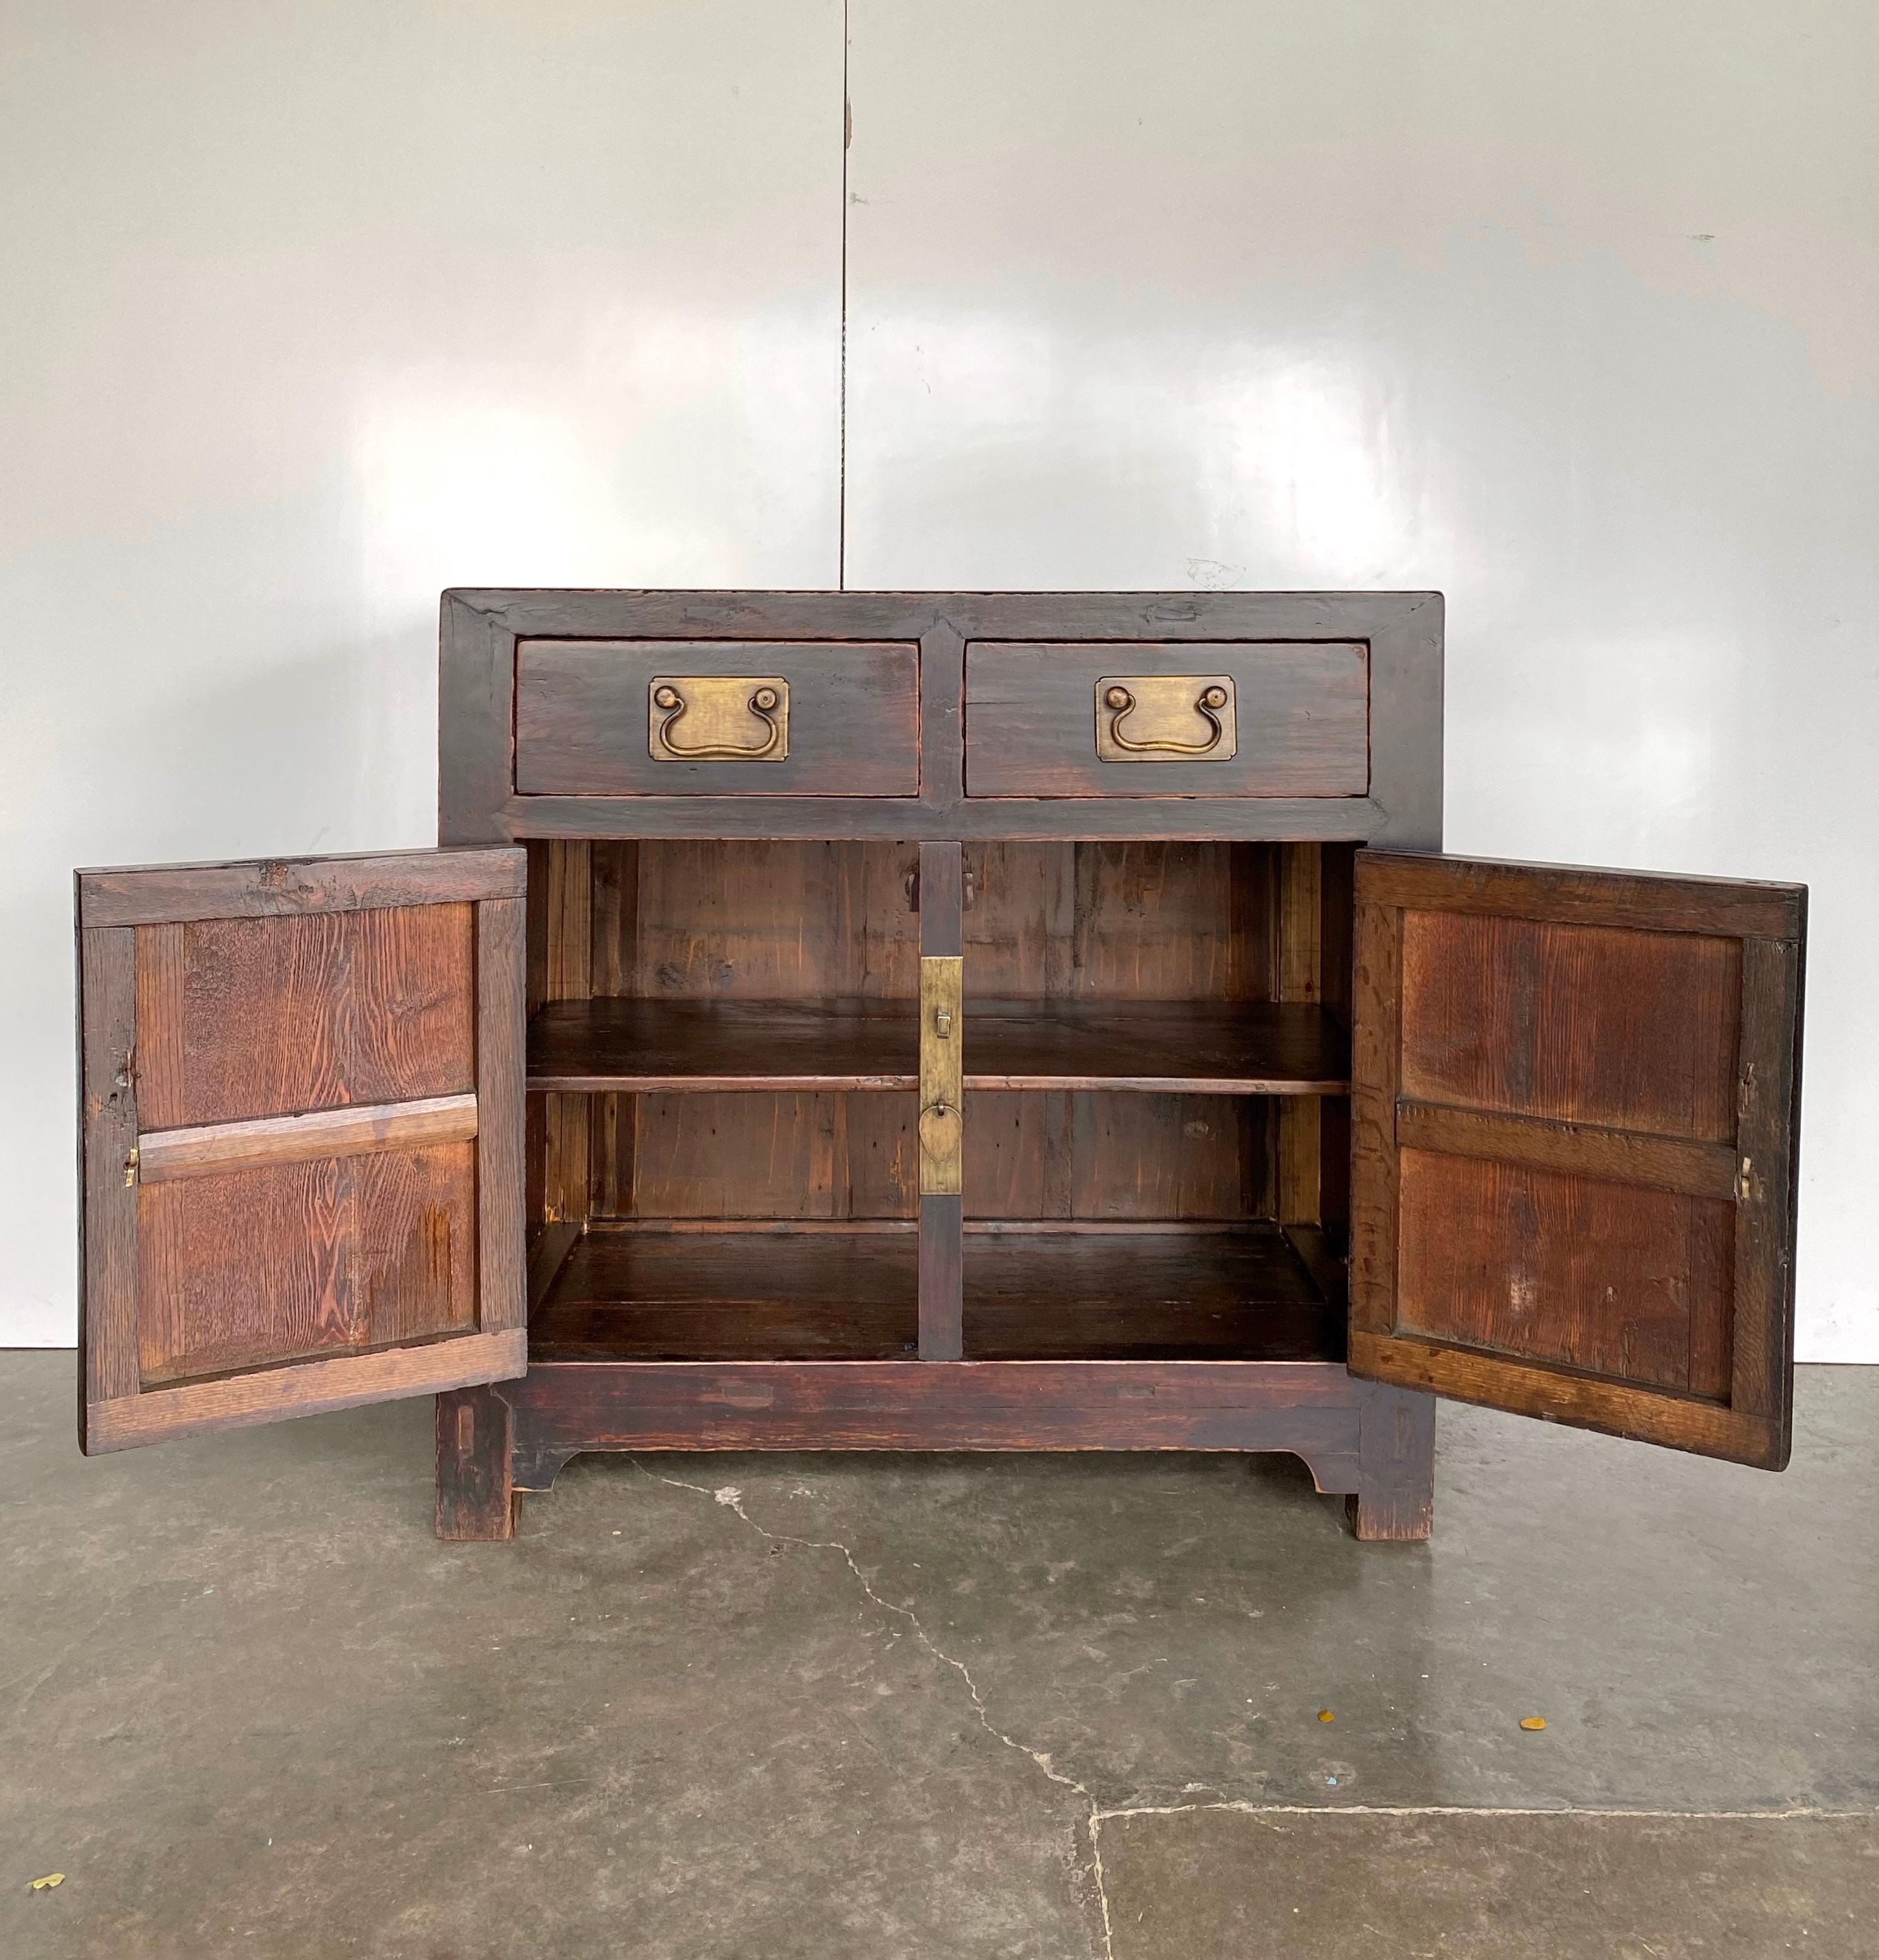 A very handsome square-cornered cabinet from Tianjin, approx. 100 years old. Made of Elm and Pine woods, we had left the beautiful original reddish brown colour on this piece original, finishing it with a semi-matte clear lacquer. The solid brass